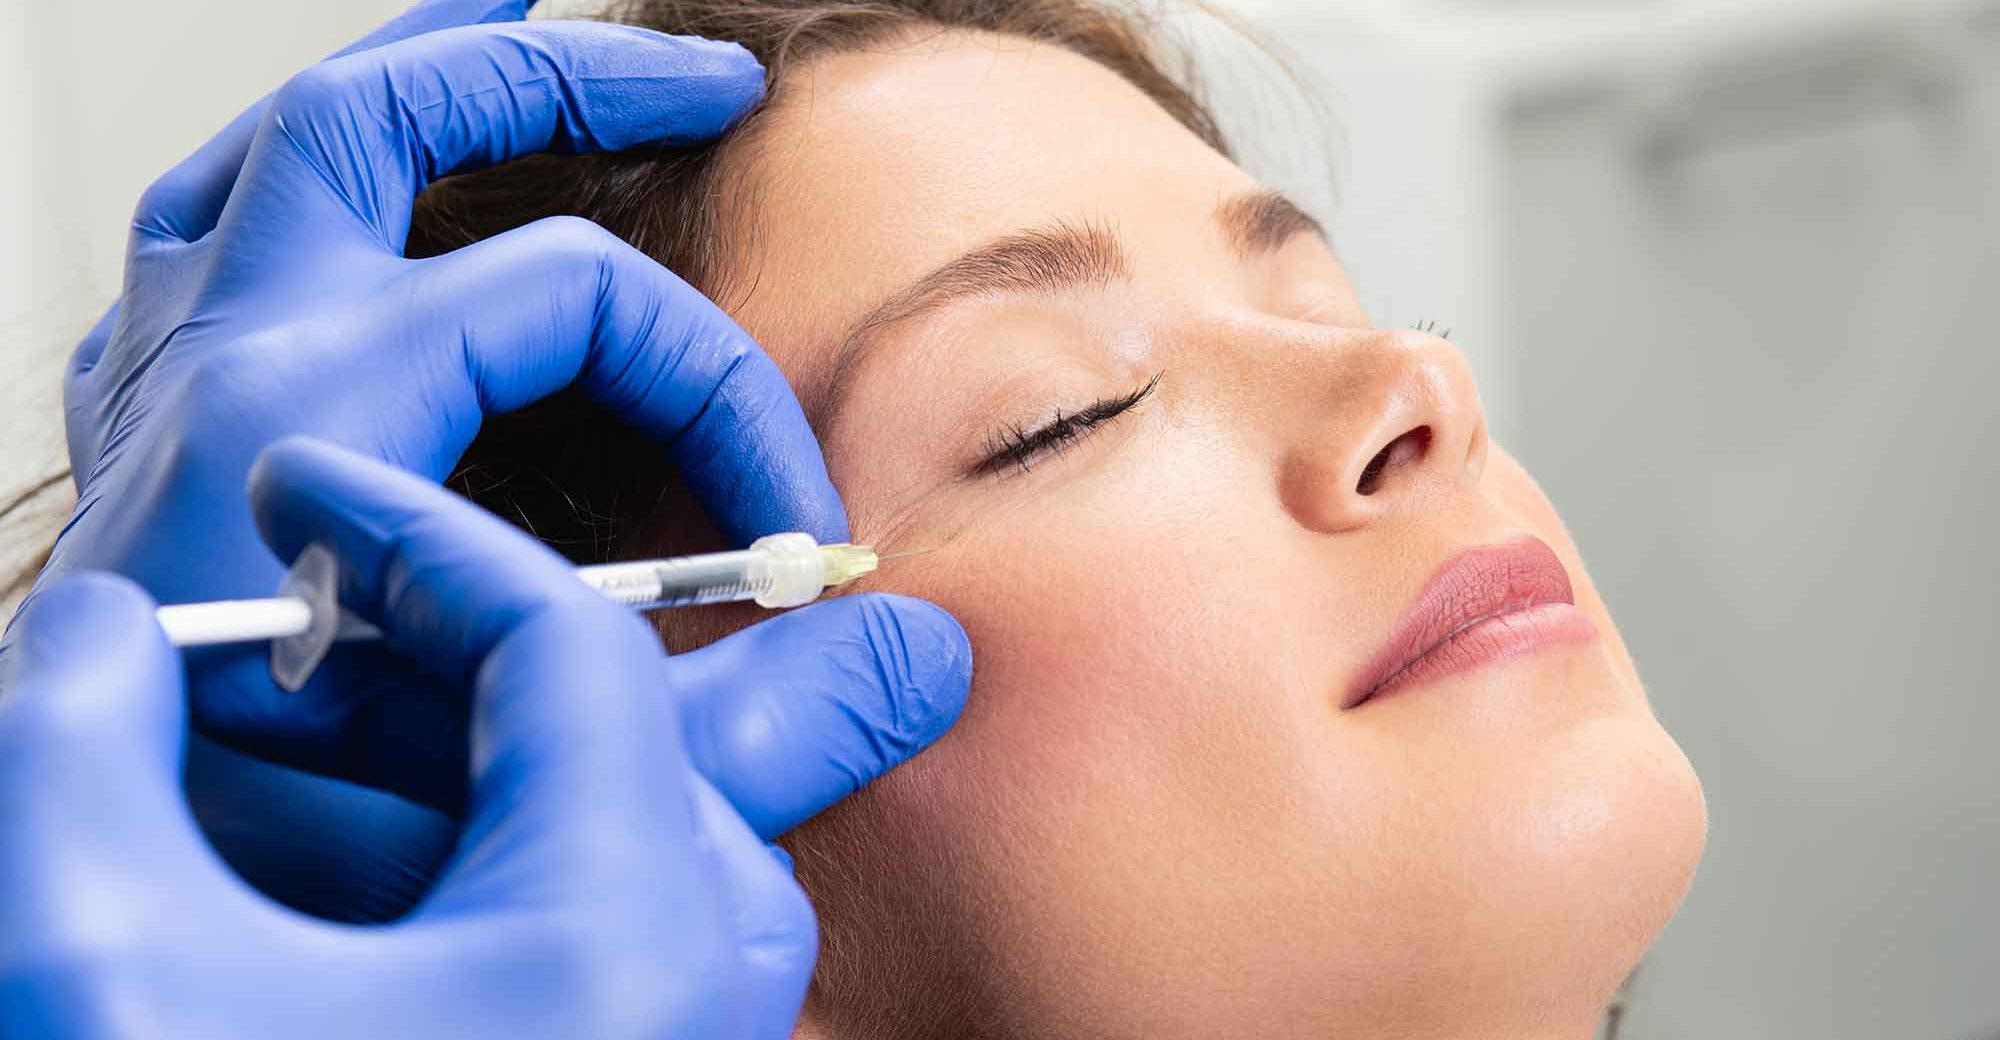 Facial Aesthetics Market size was valued US$ 5.6 billion in 2021 and is estimated to reach US$ 23.4 billion by 2029, growing at a CAGR of 11.7% during the forecast period (2023-2030)